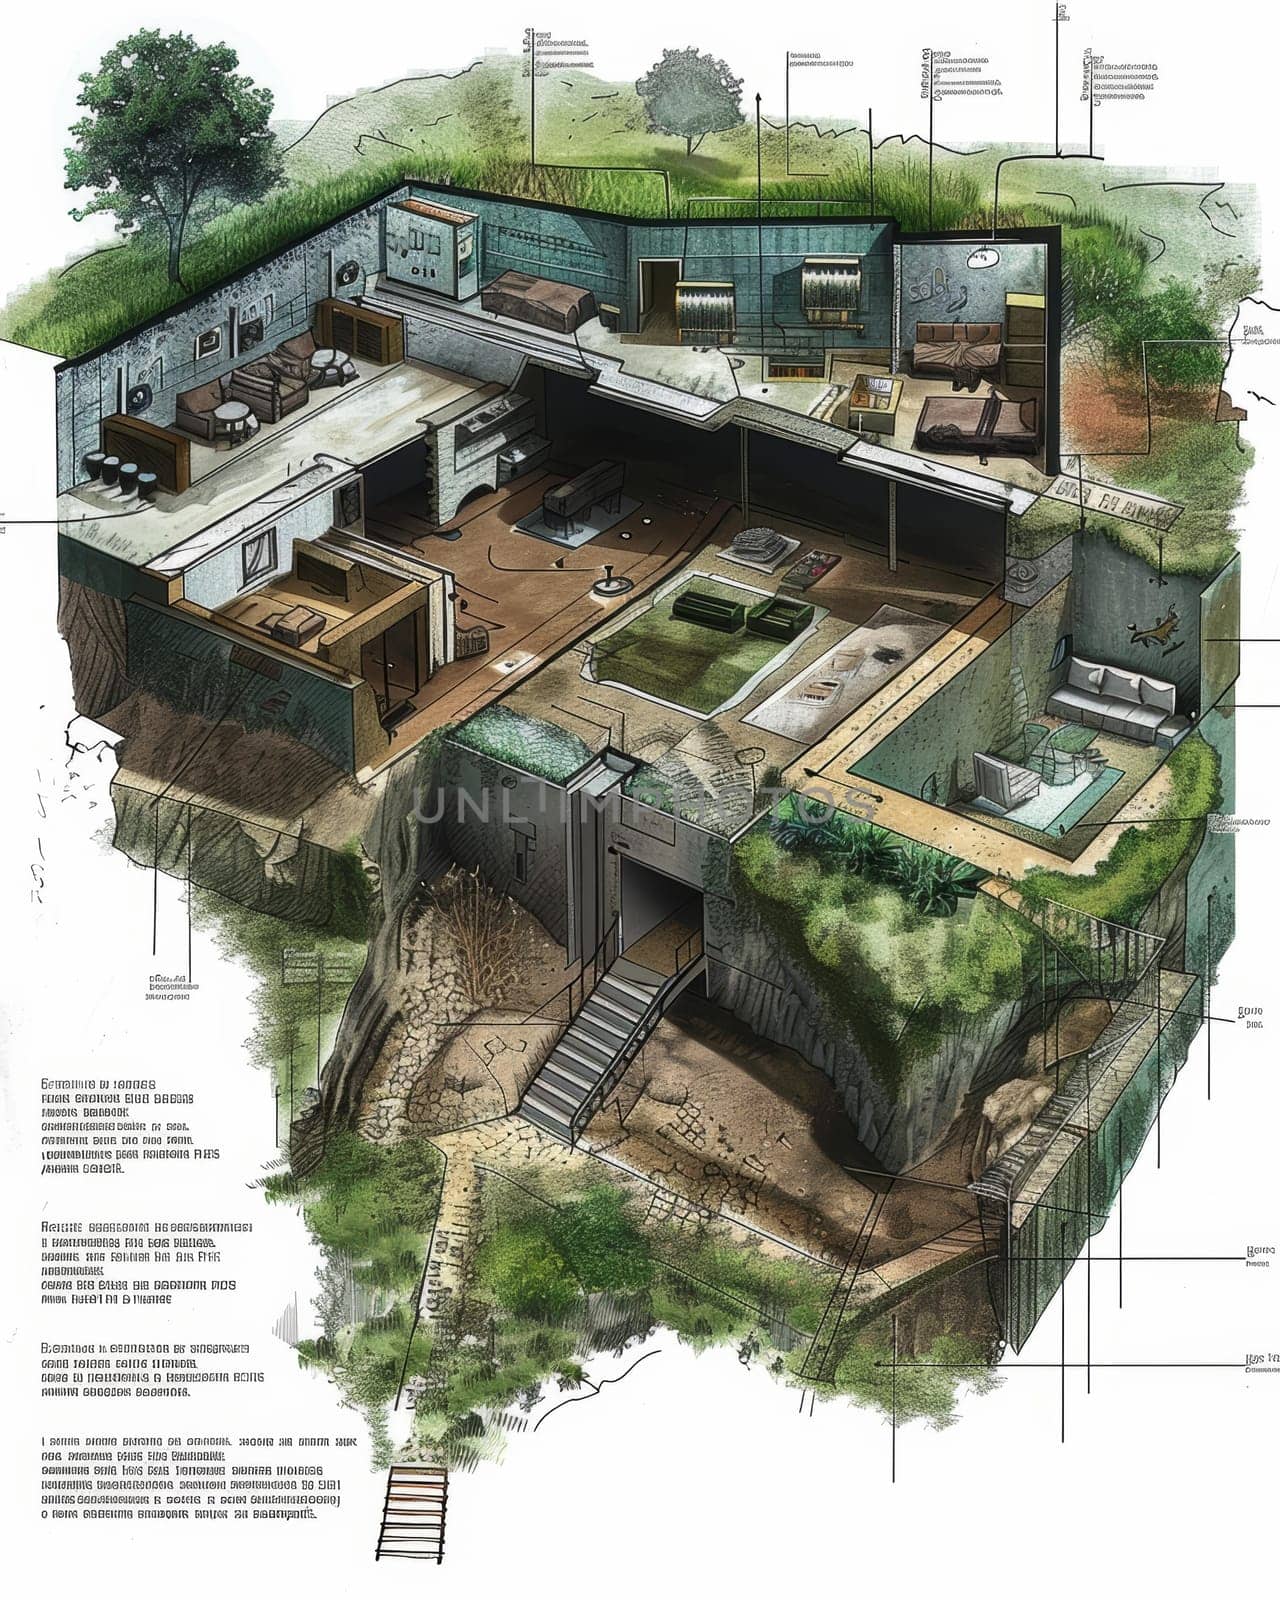 Detailed sectional perspective of an underground eco-house, revealing a modern, sustainable interior and surrounding earth layers